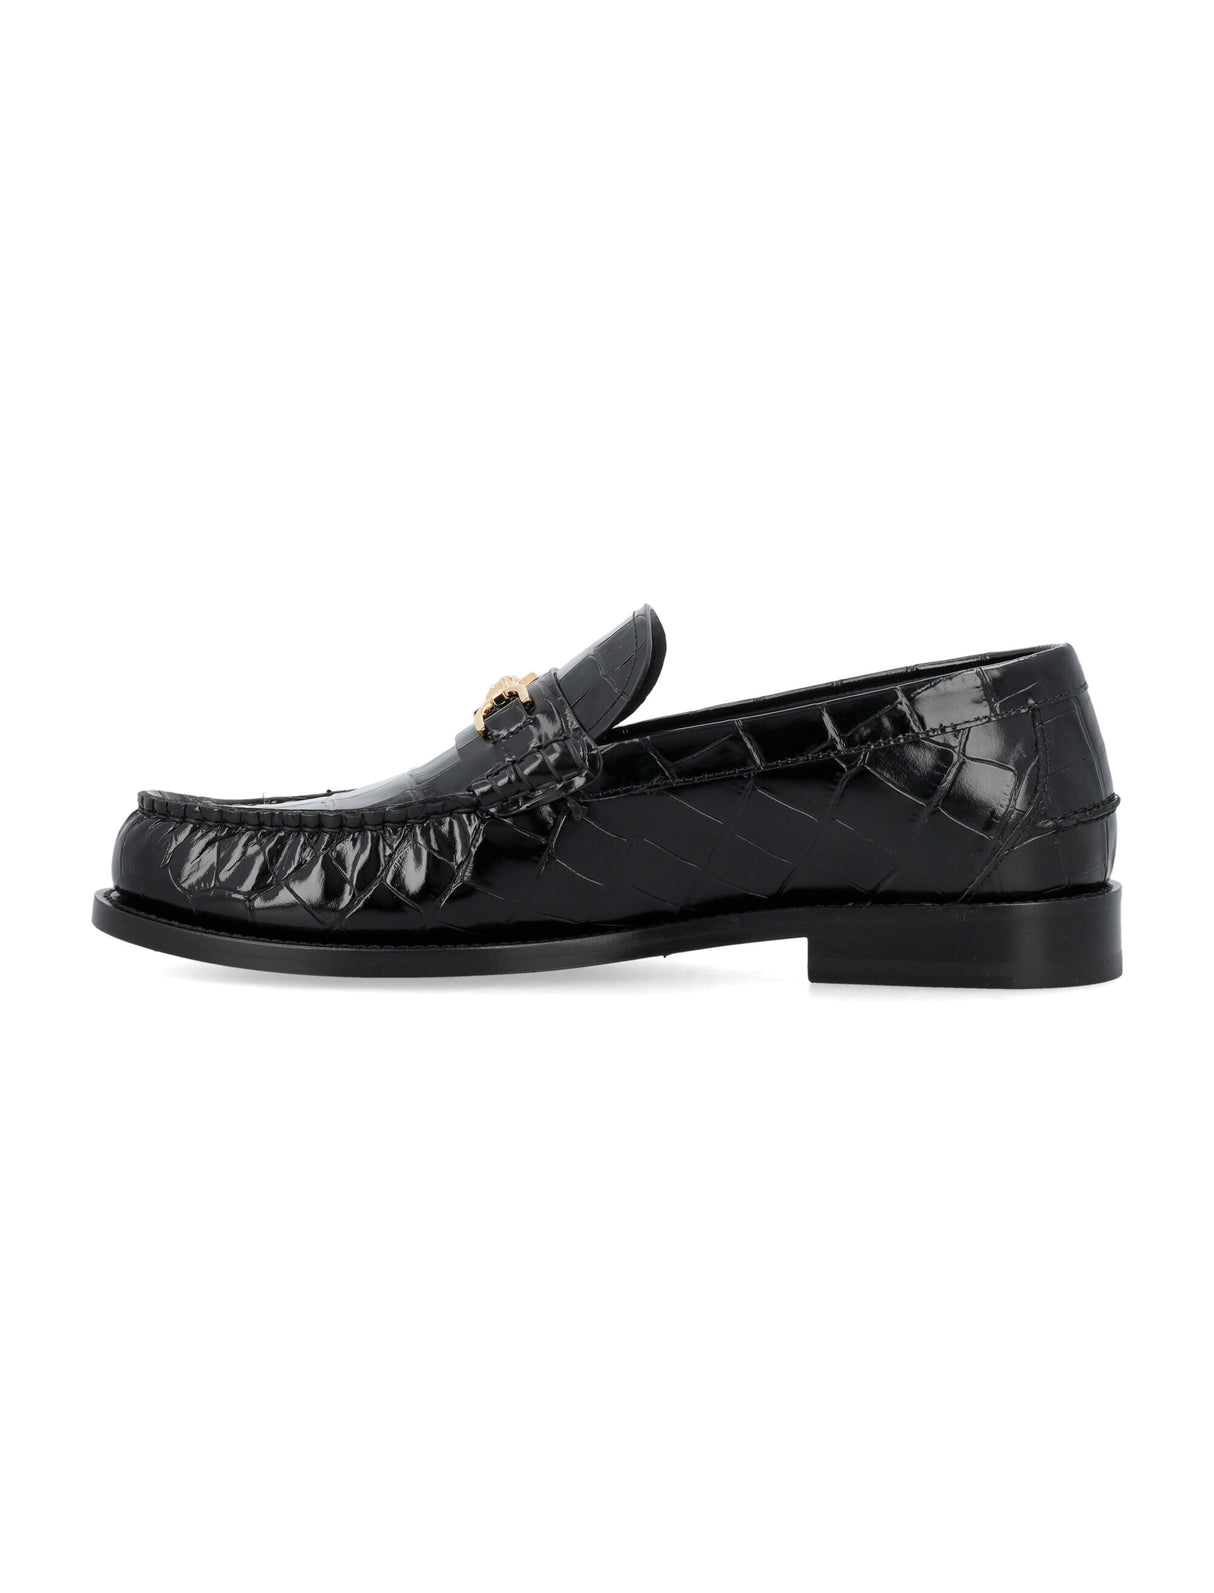 VERSACE LOAFER COIN CROCCO PRINT